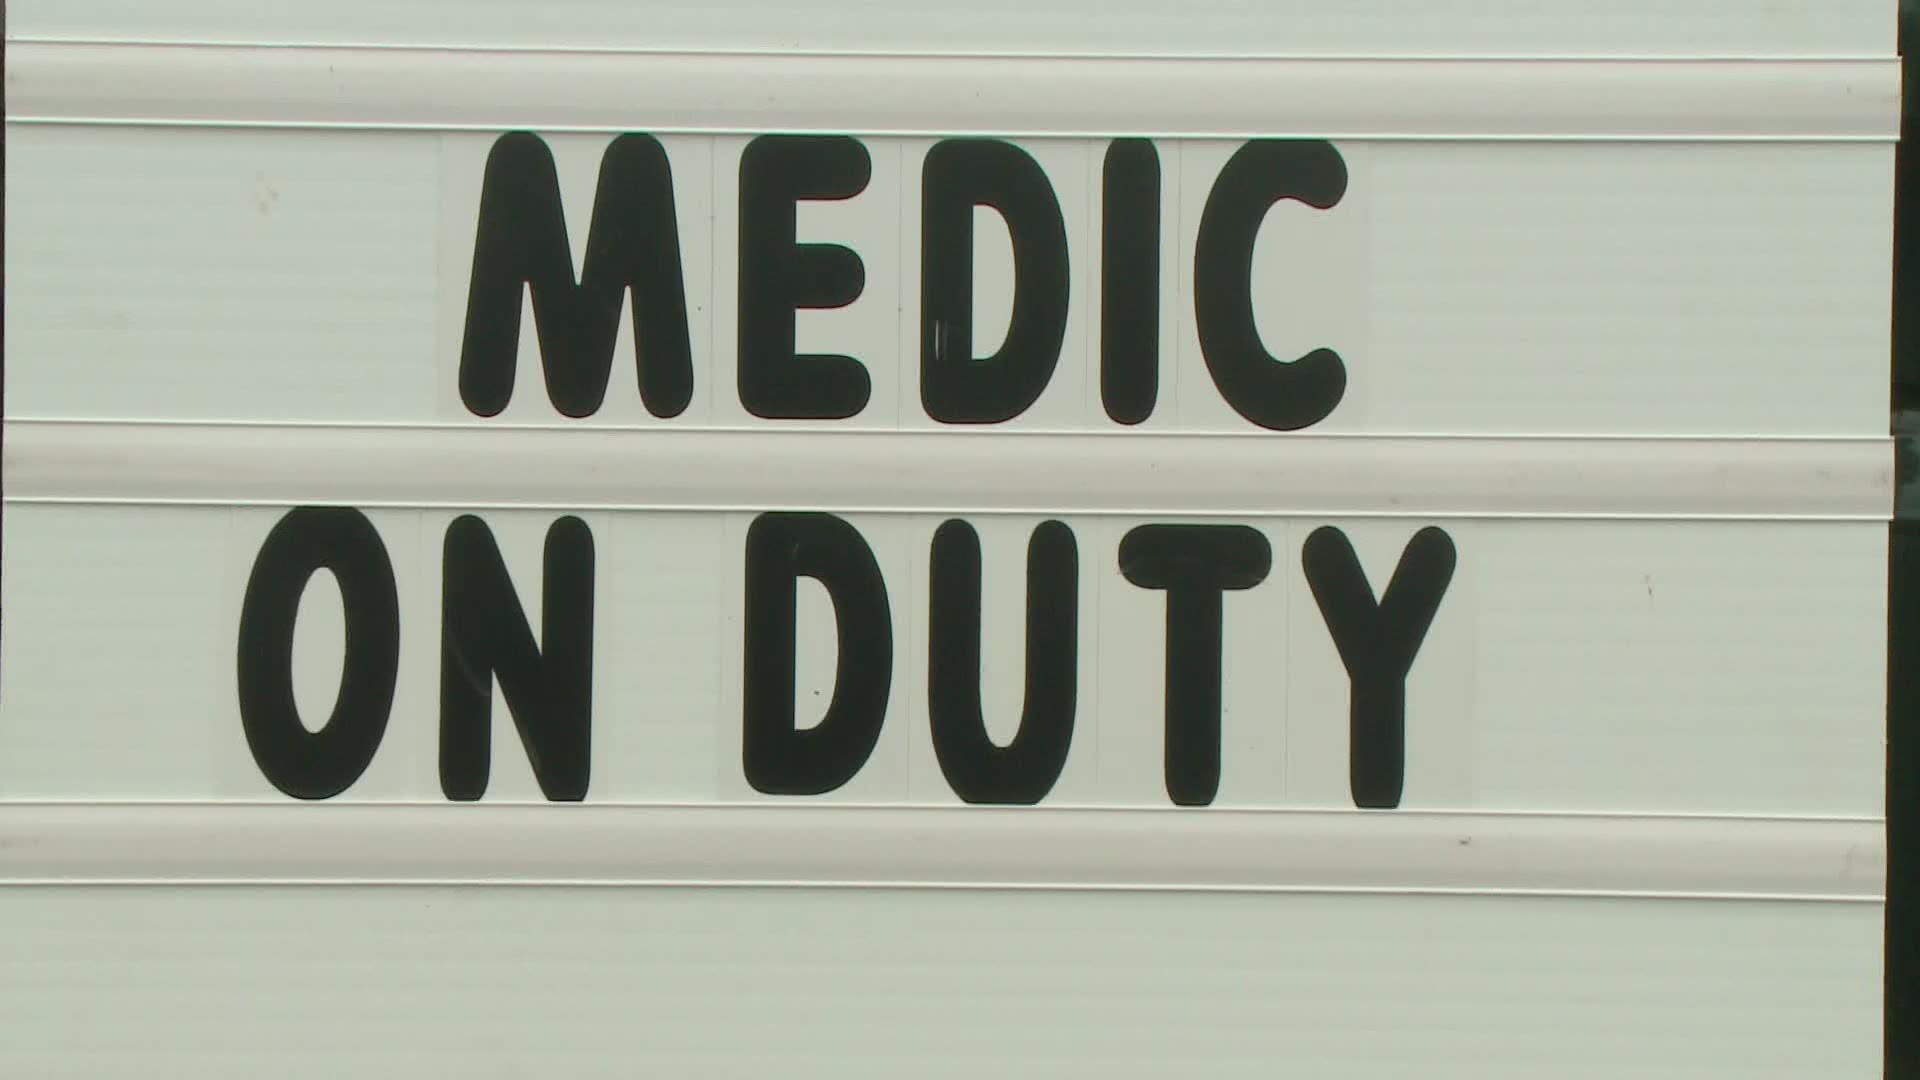 Mobile Medics helping homeless community and city budget